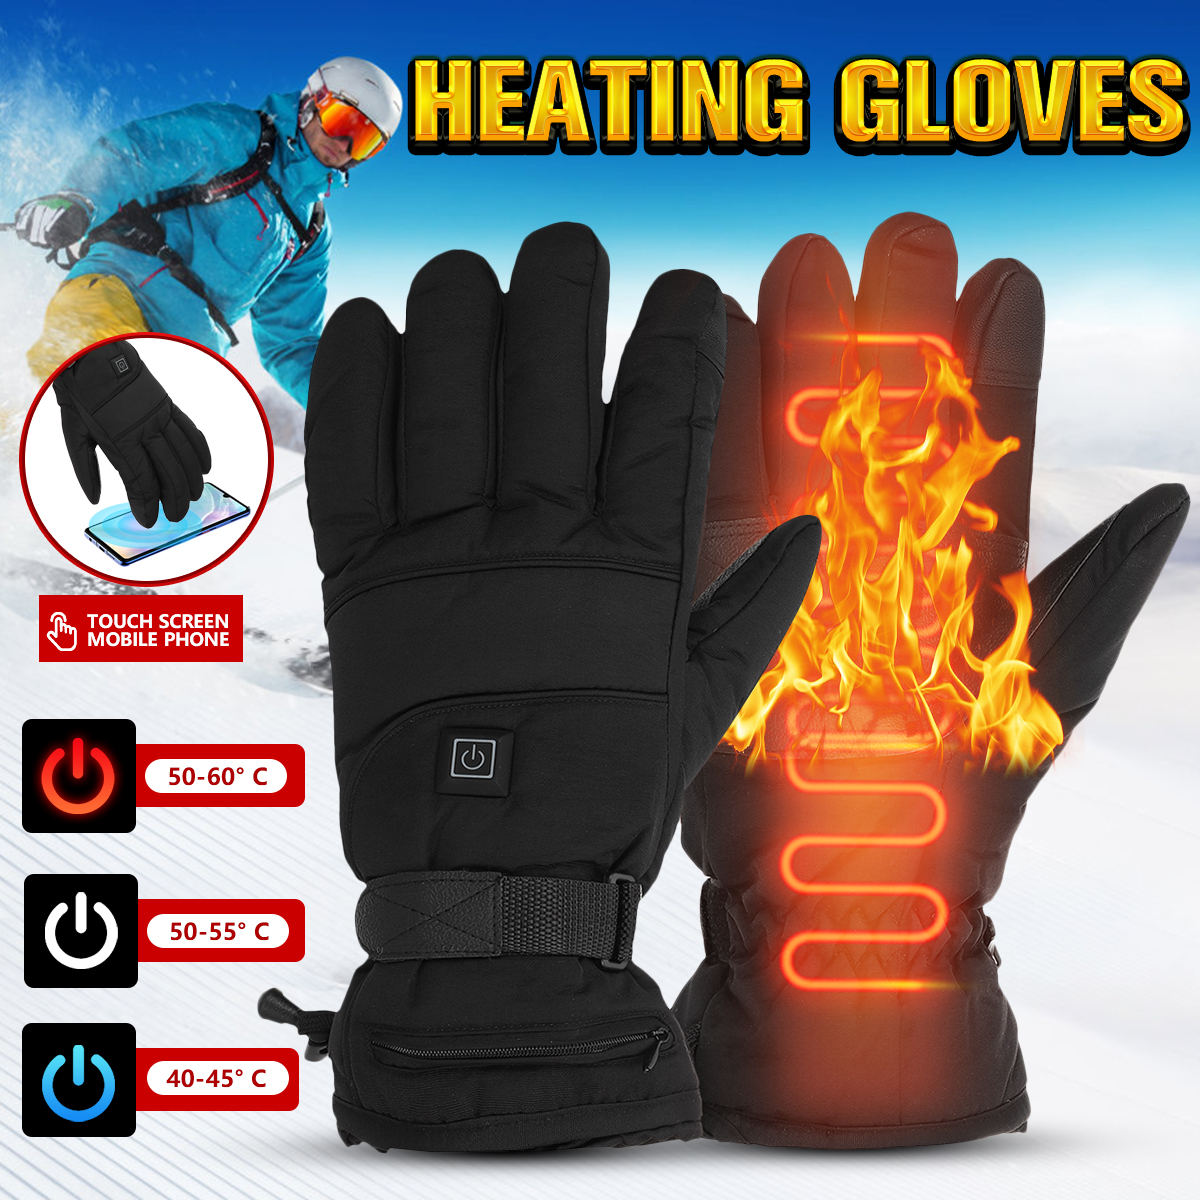 1-Pair-Electric-Heated-Hand-Gloves-3-Modes-Touchscreen-Motorbike-Motorcycle-Winter-Warm-Heated-Batte-1756429-1